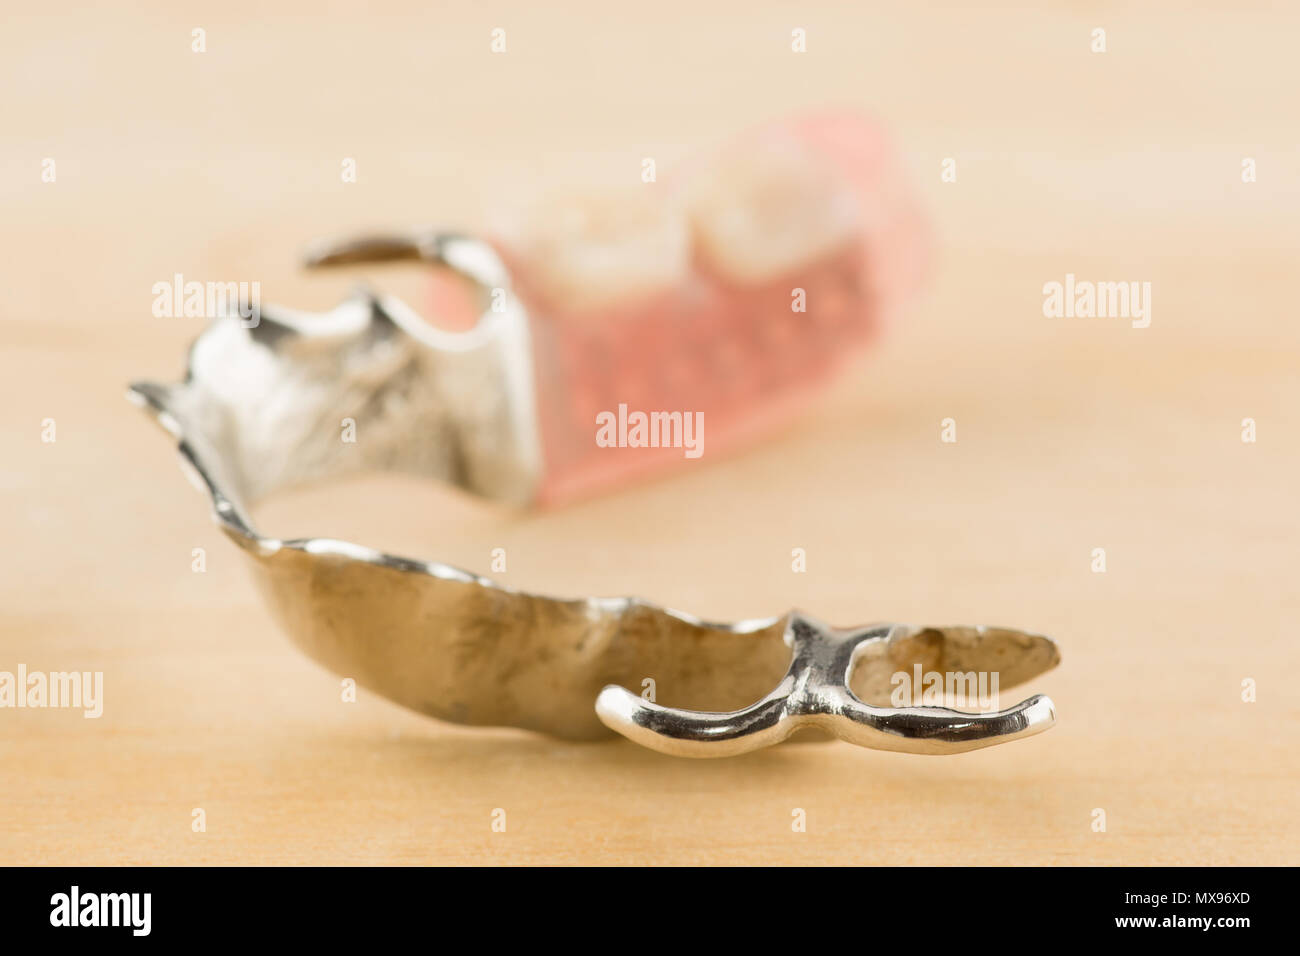 large image of a modern denture on a wooden background Stock Photo